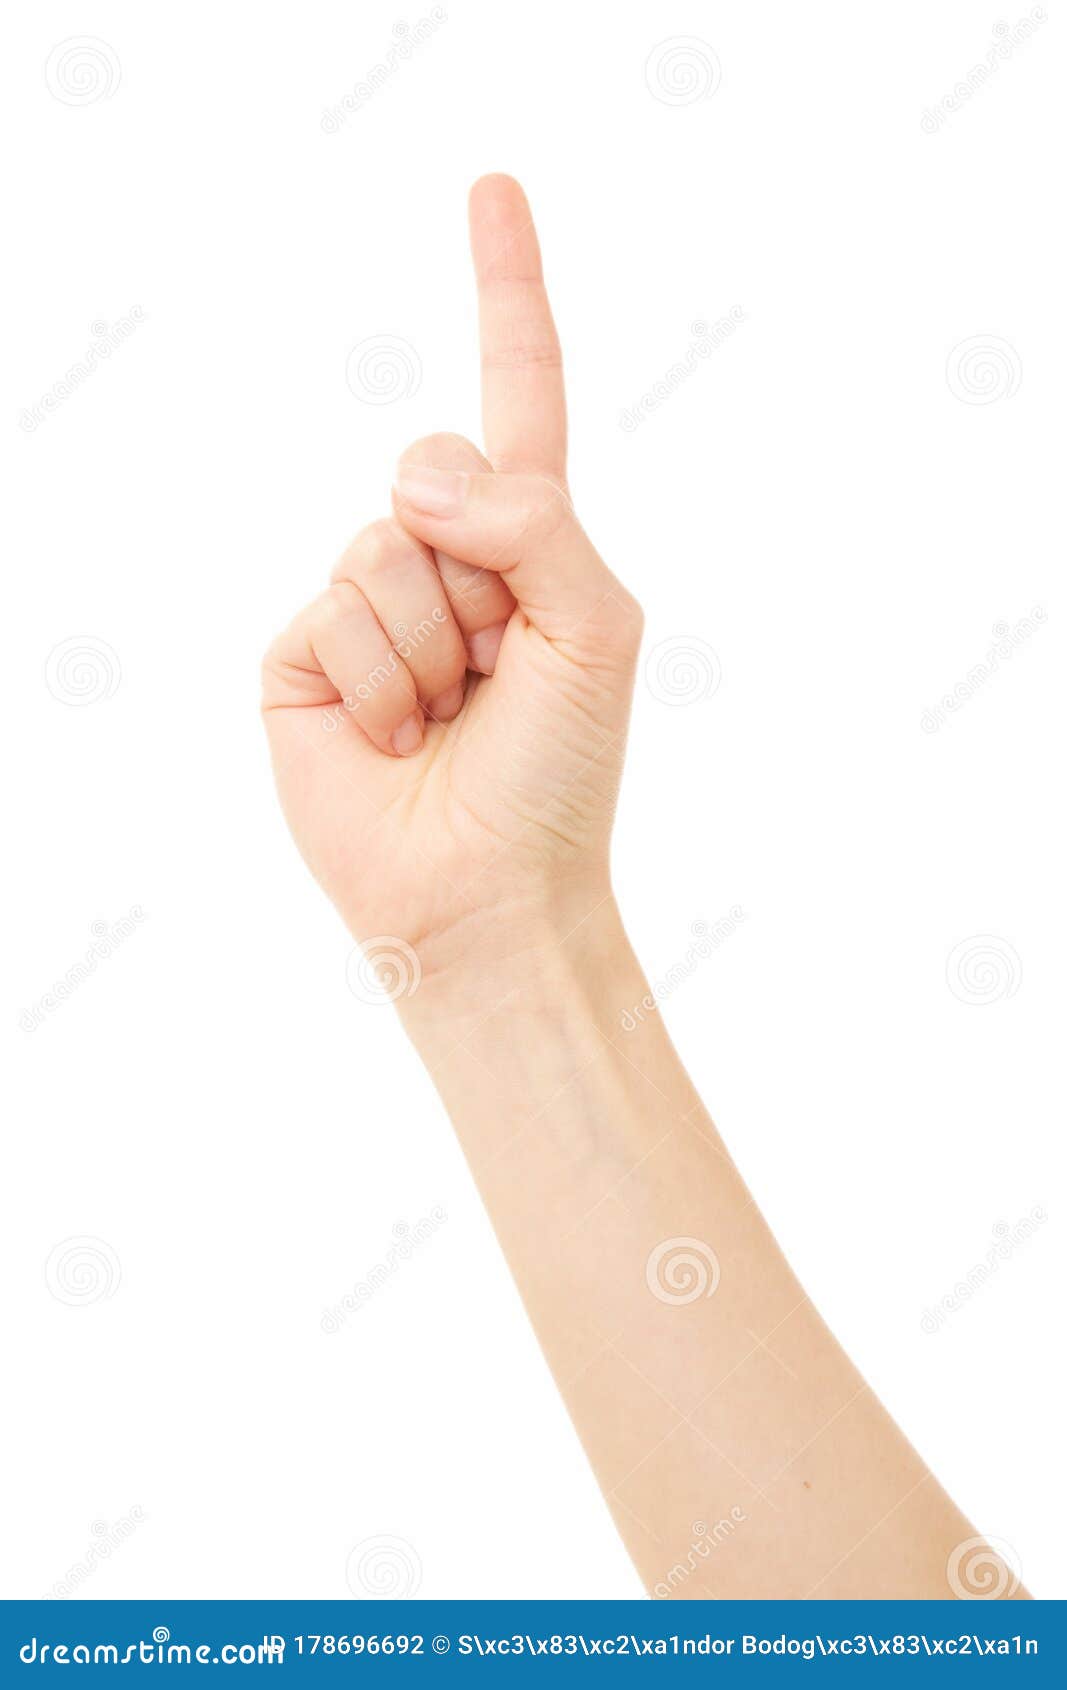 Woman Index Finger Up Hand Gesture Stock Photo Image Of Adult